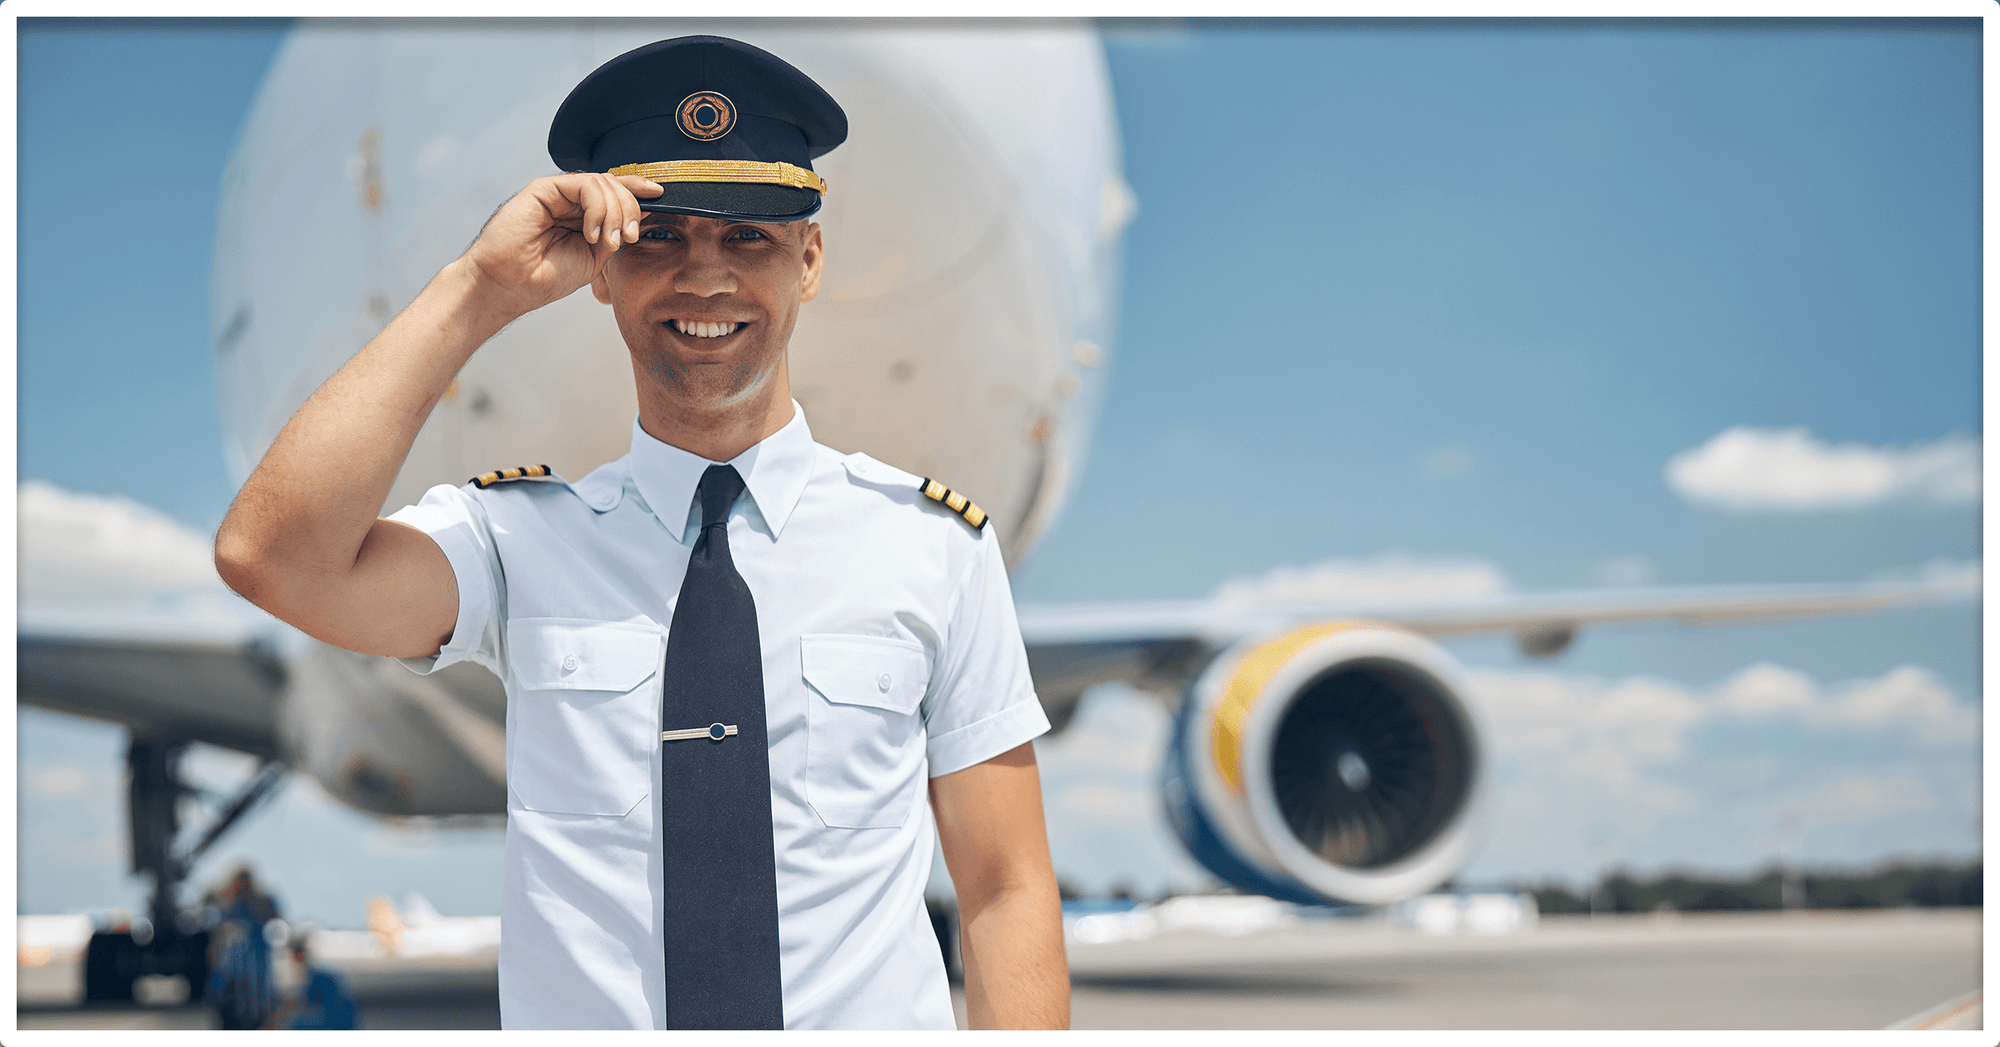 Pilot Shirt Maintenance: Tips for Keeping Your Aviation Attire Impeccable